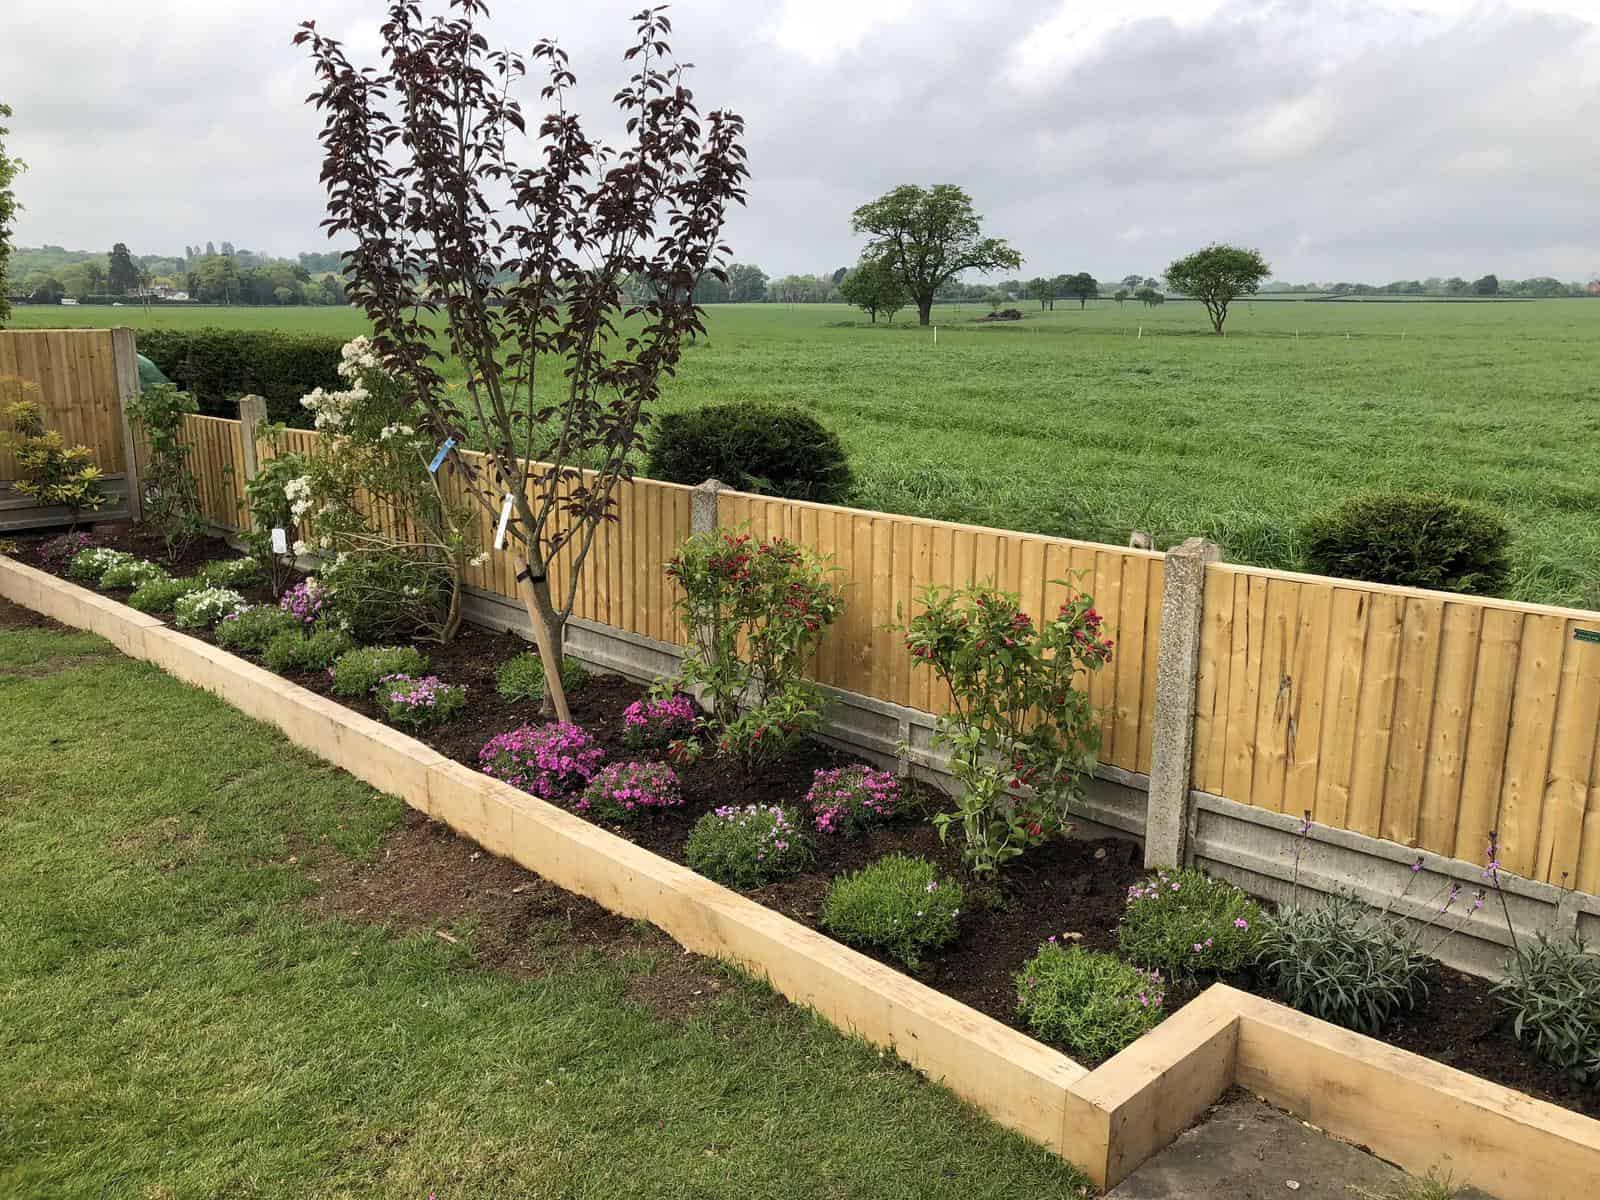 Garden borders, fences and plants updated